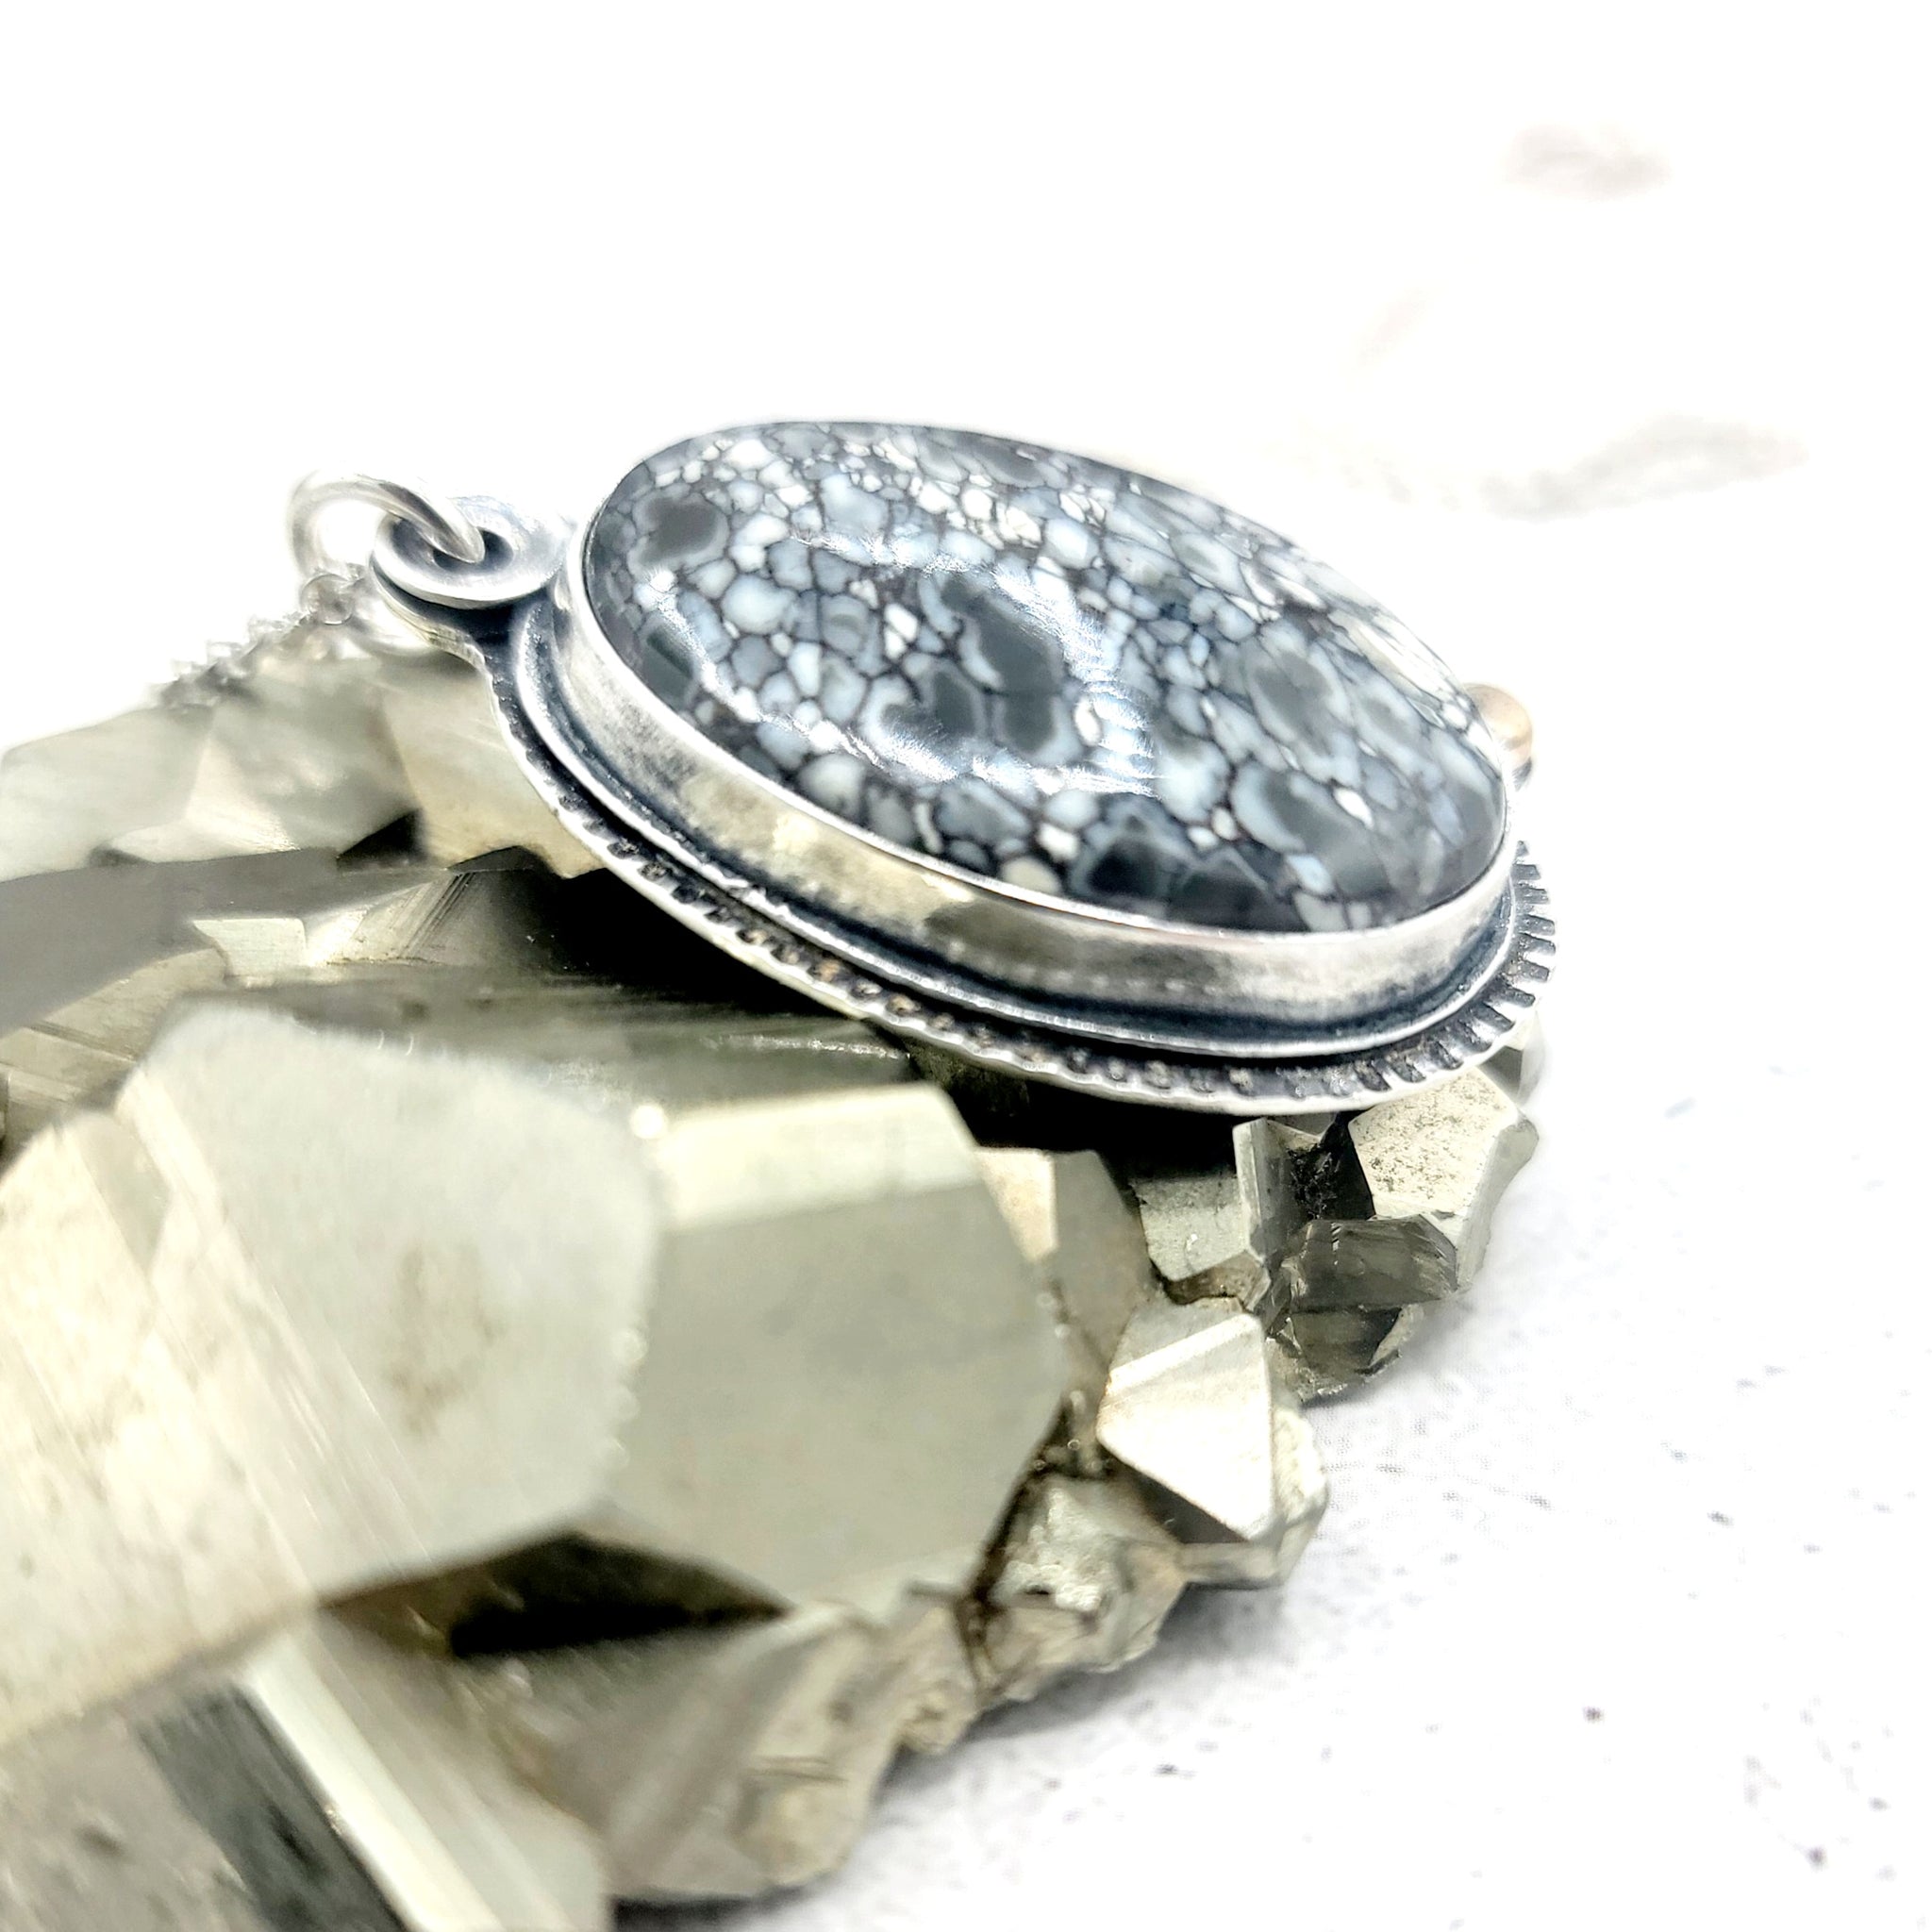 Luna Lacuna Greyscale Collection in Sterling Silver